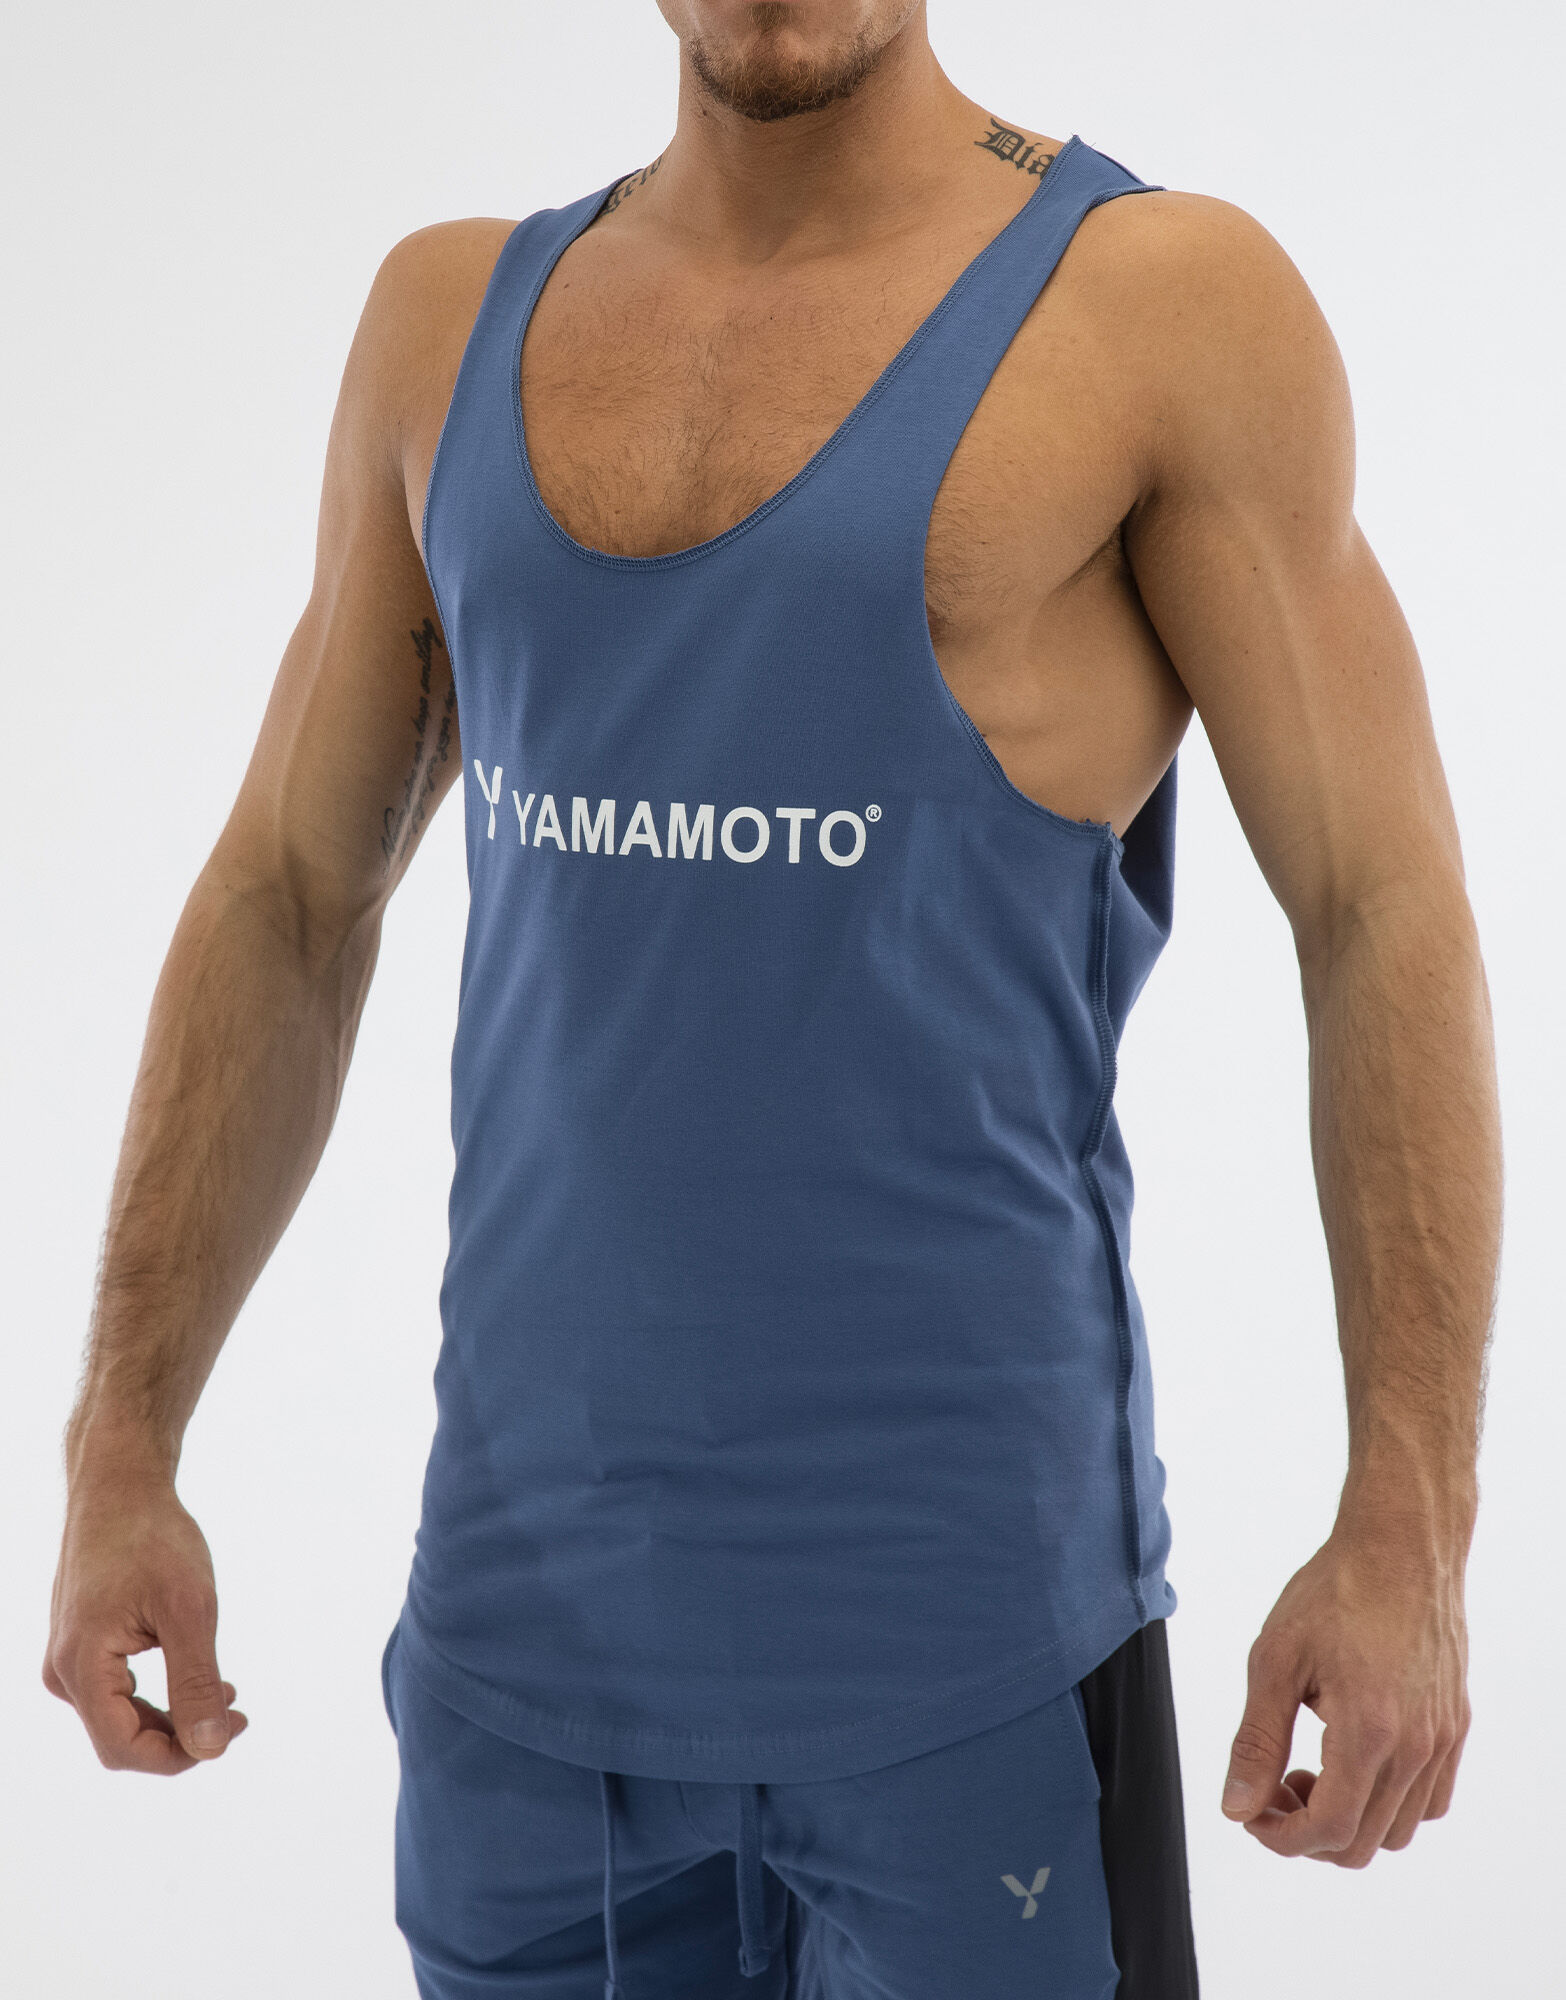 YAMAMOTO OUTFIT Man Tank Top Wide Shoulder Colore: Blu L